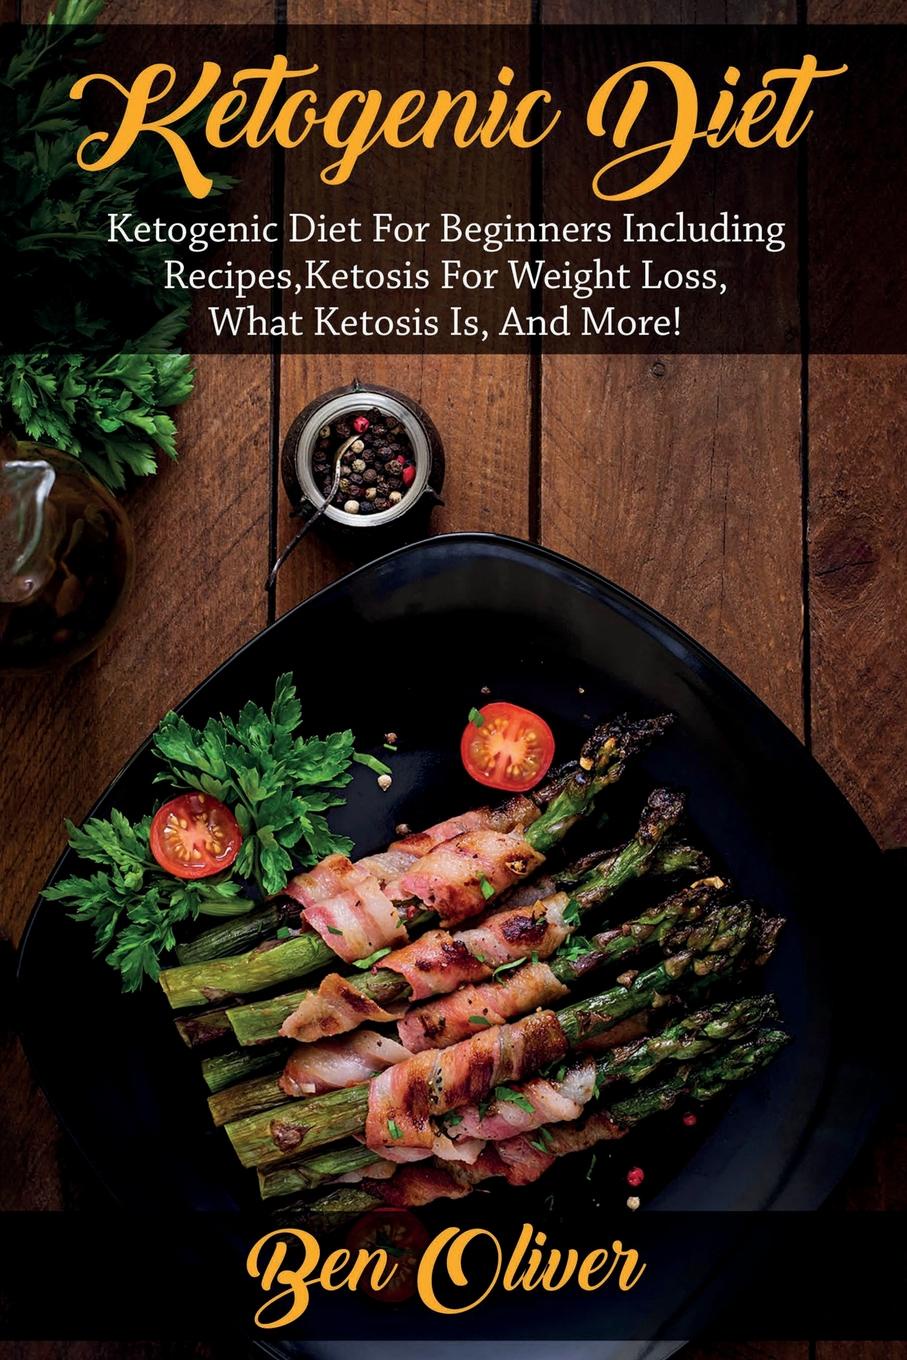 Ketogenic Diet. Ketogenic diet for beginners including recipes, ketosis for weight loss, what ketosis is, and more!